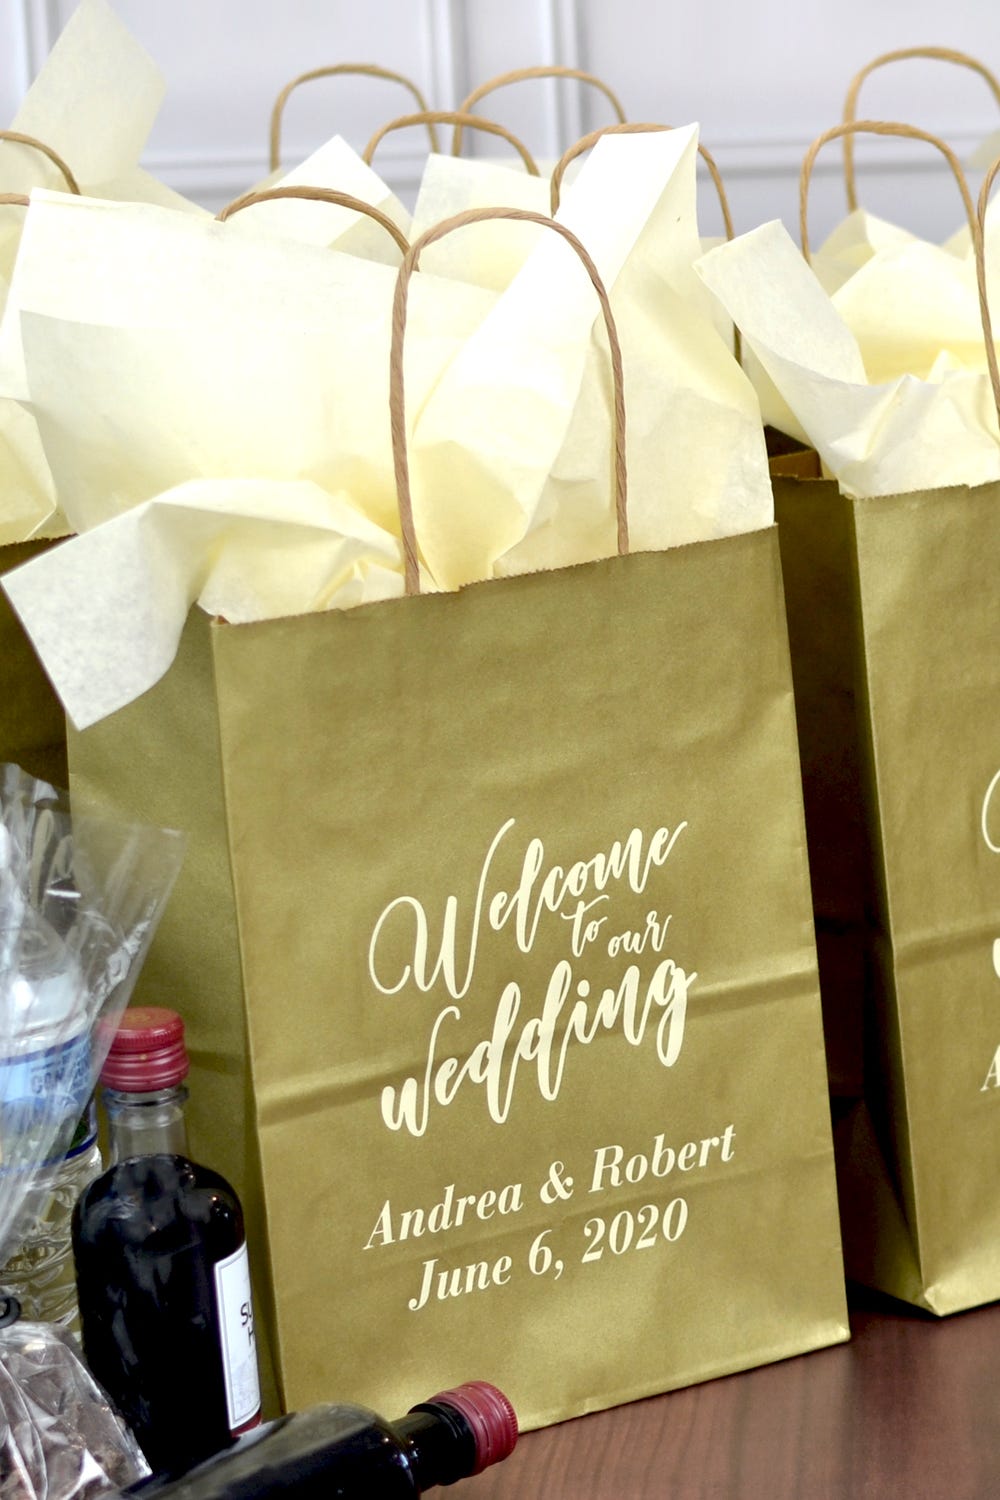 53 Phrases for Your Wedding Welcome Bags | by My Wedding Reception Ideas |  Medium